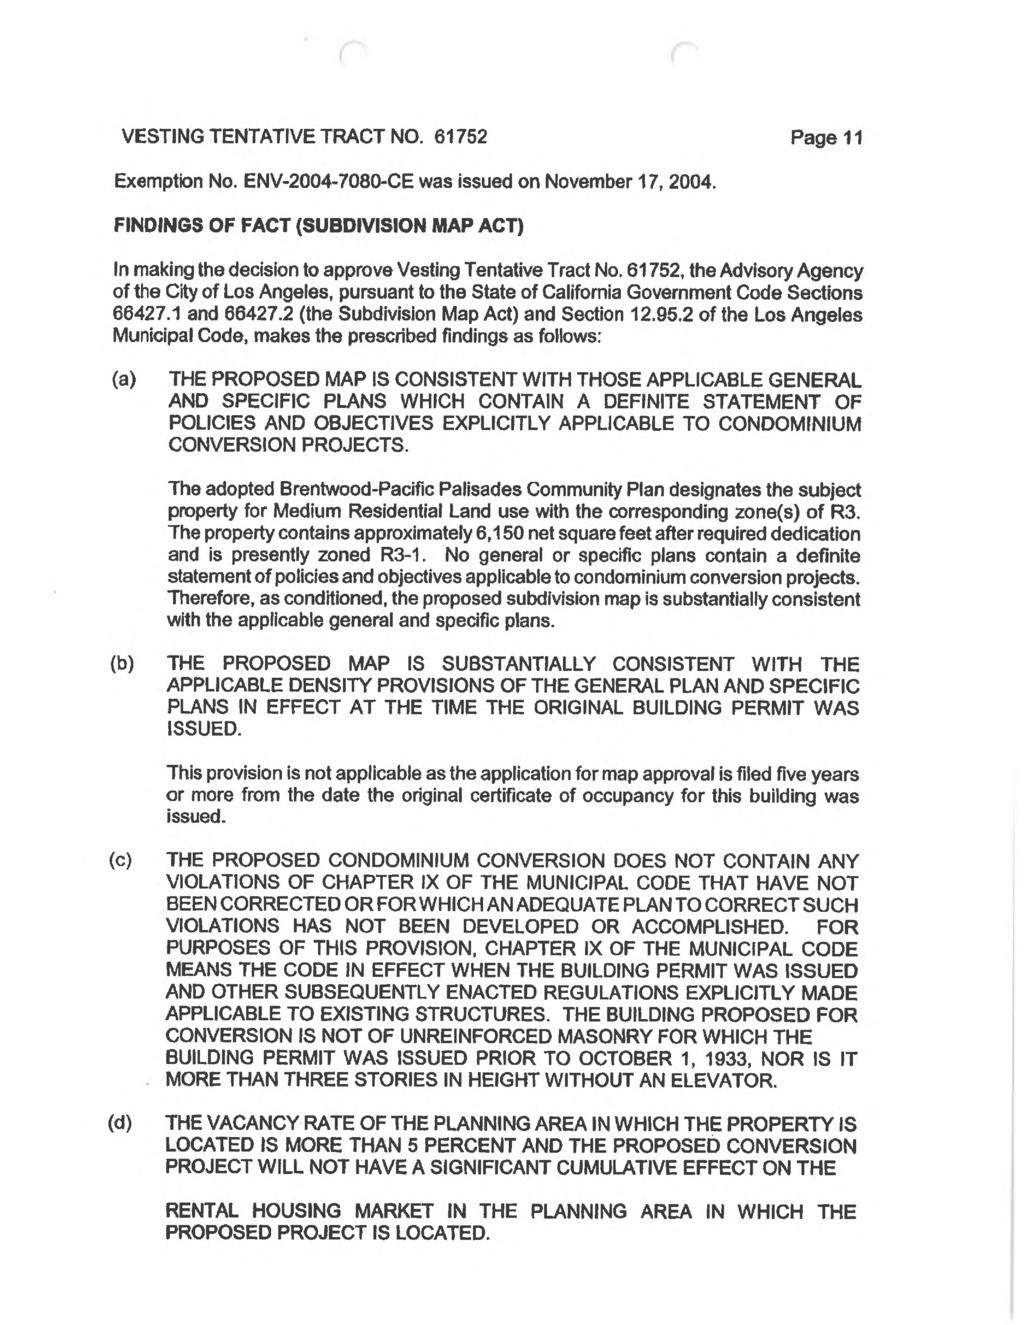 VESTING TENTATIVE TRACT NO. 61752 Page 11 Exemption No. ENV-2004-7080-CE was issued on November 17, 2004.